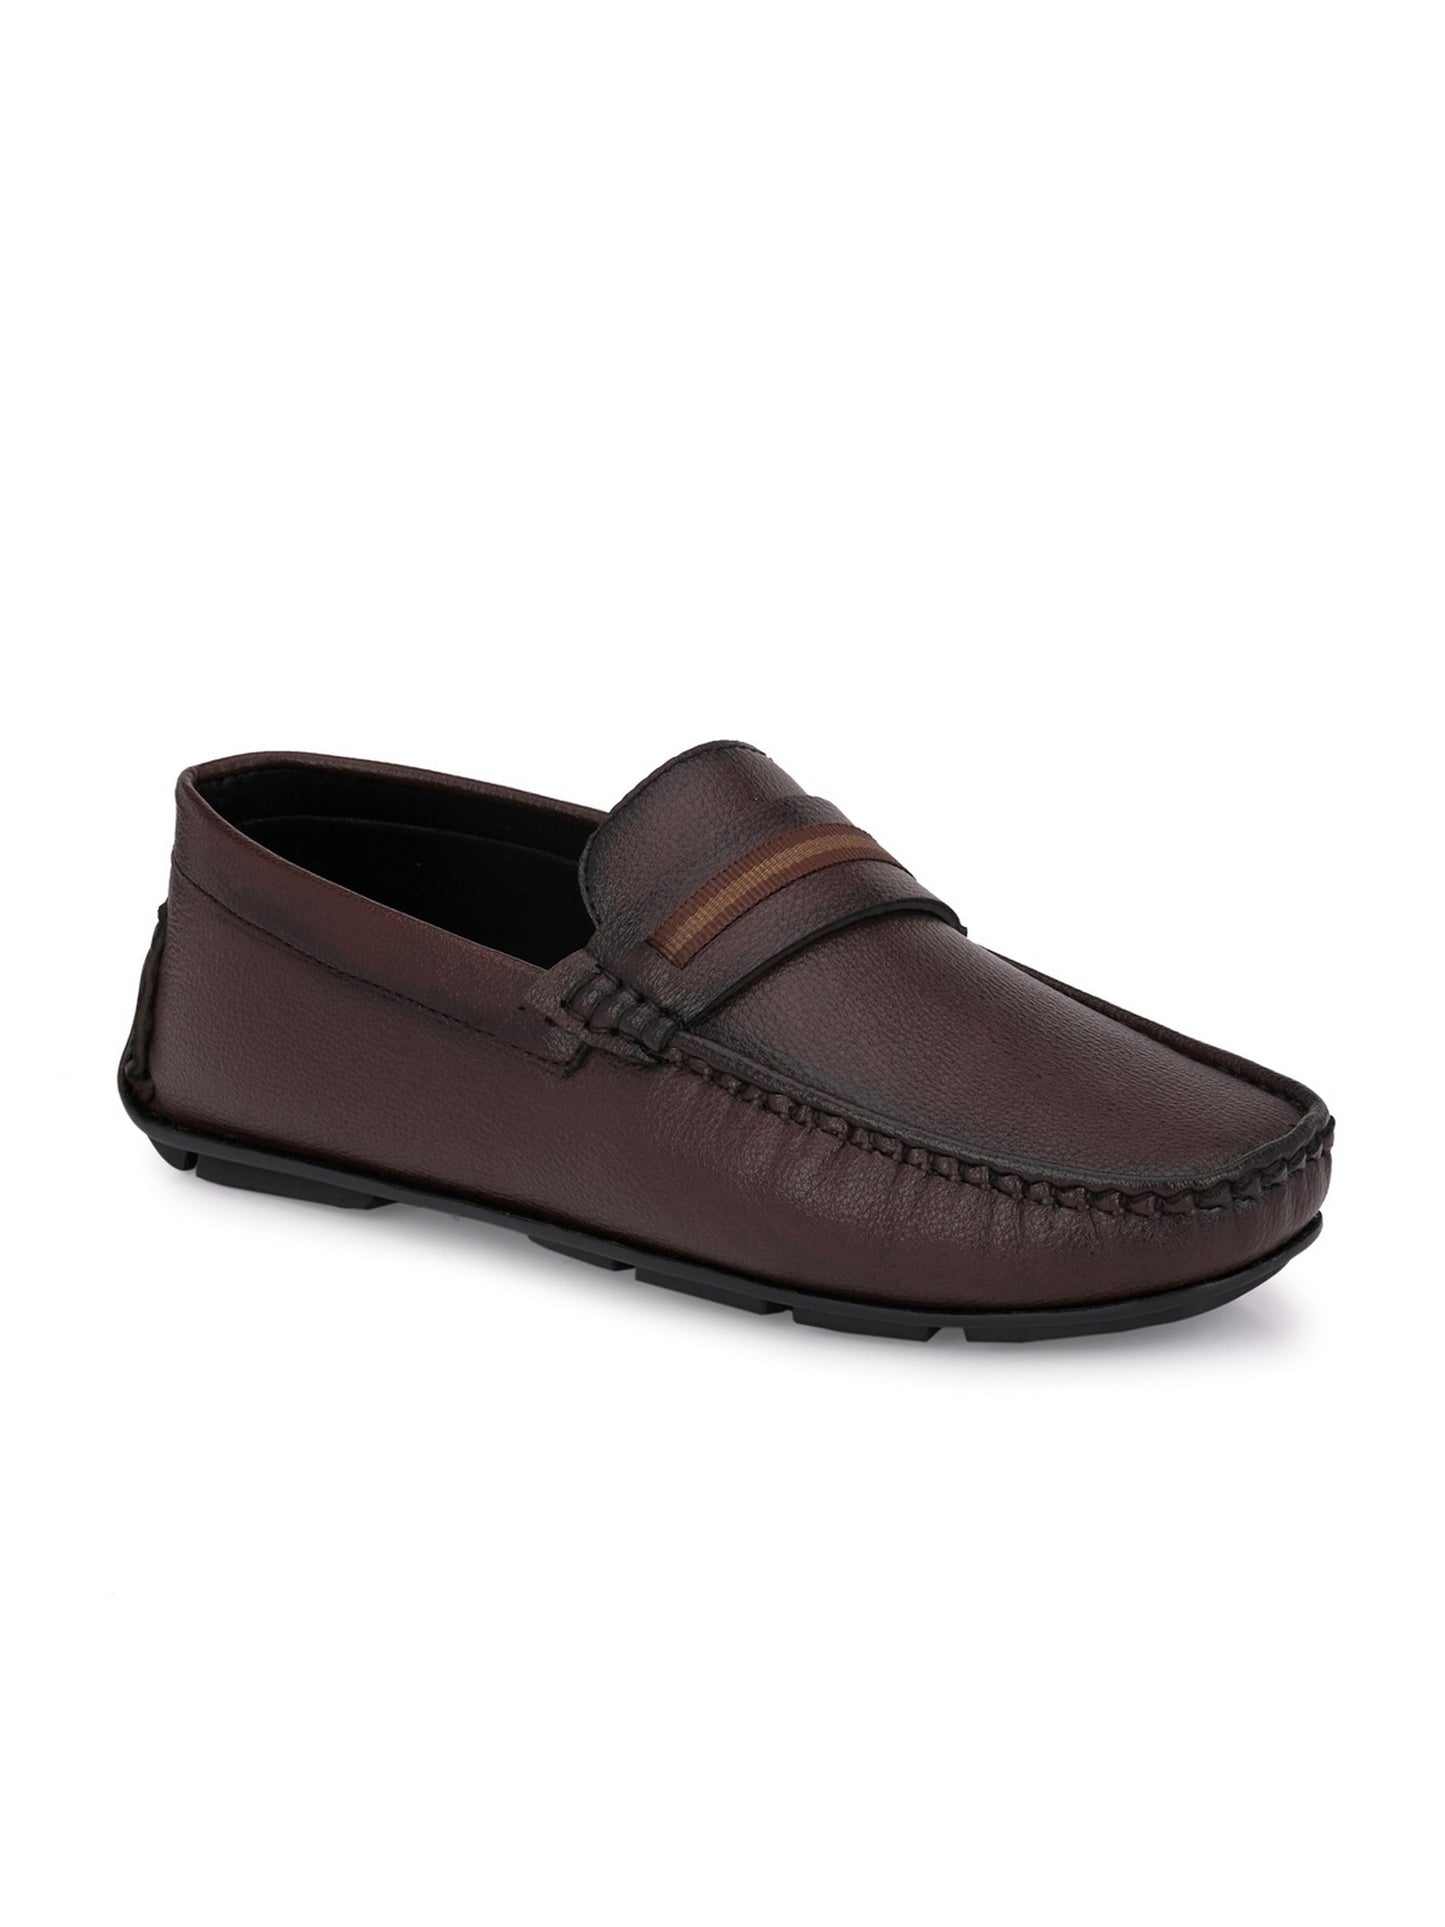 Guava Men's Brown Casual Slip On Driving Loafers (GV15JA783)